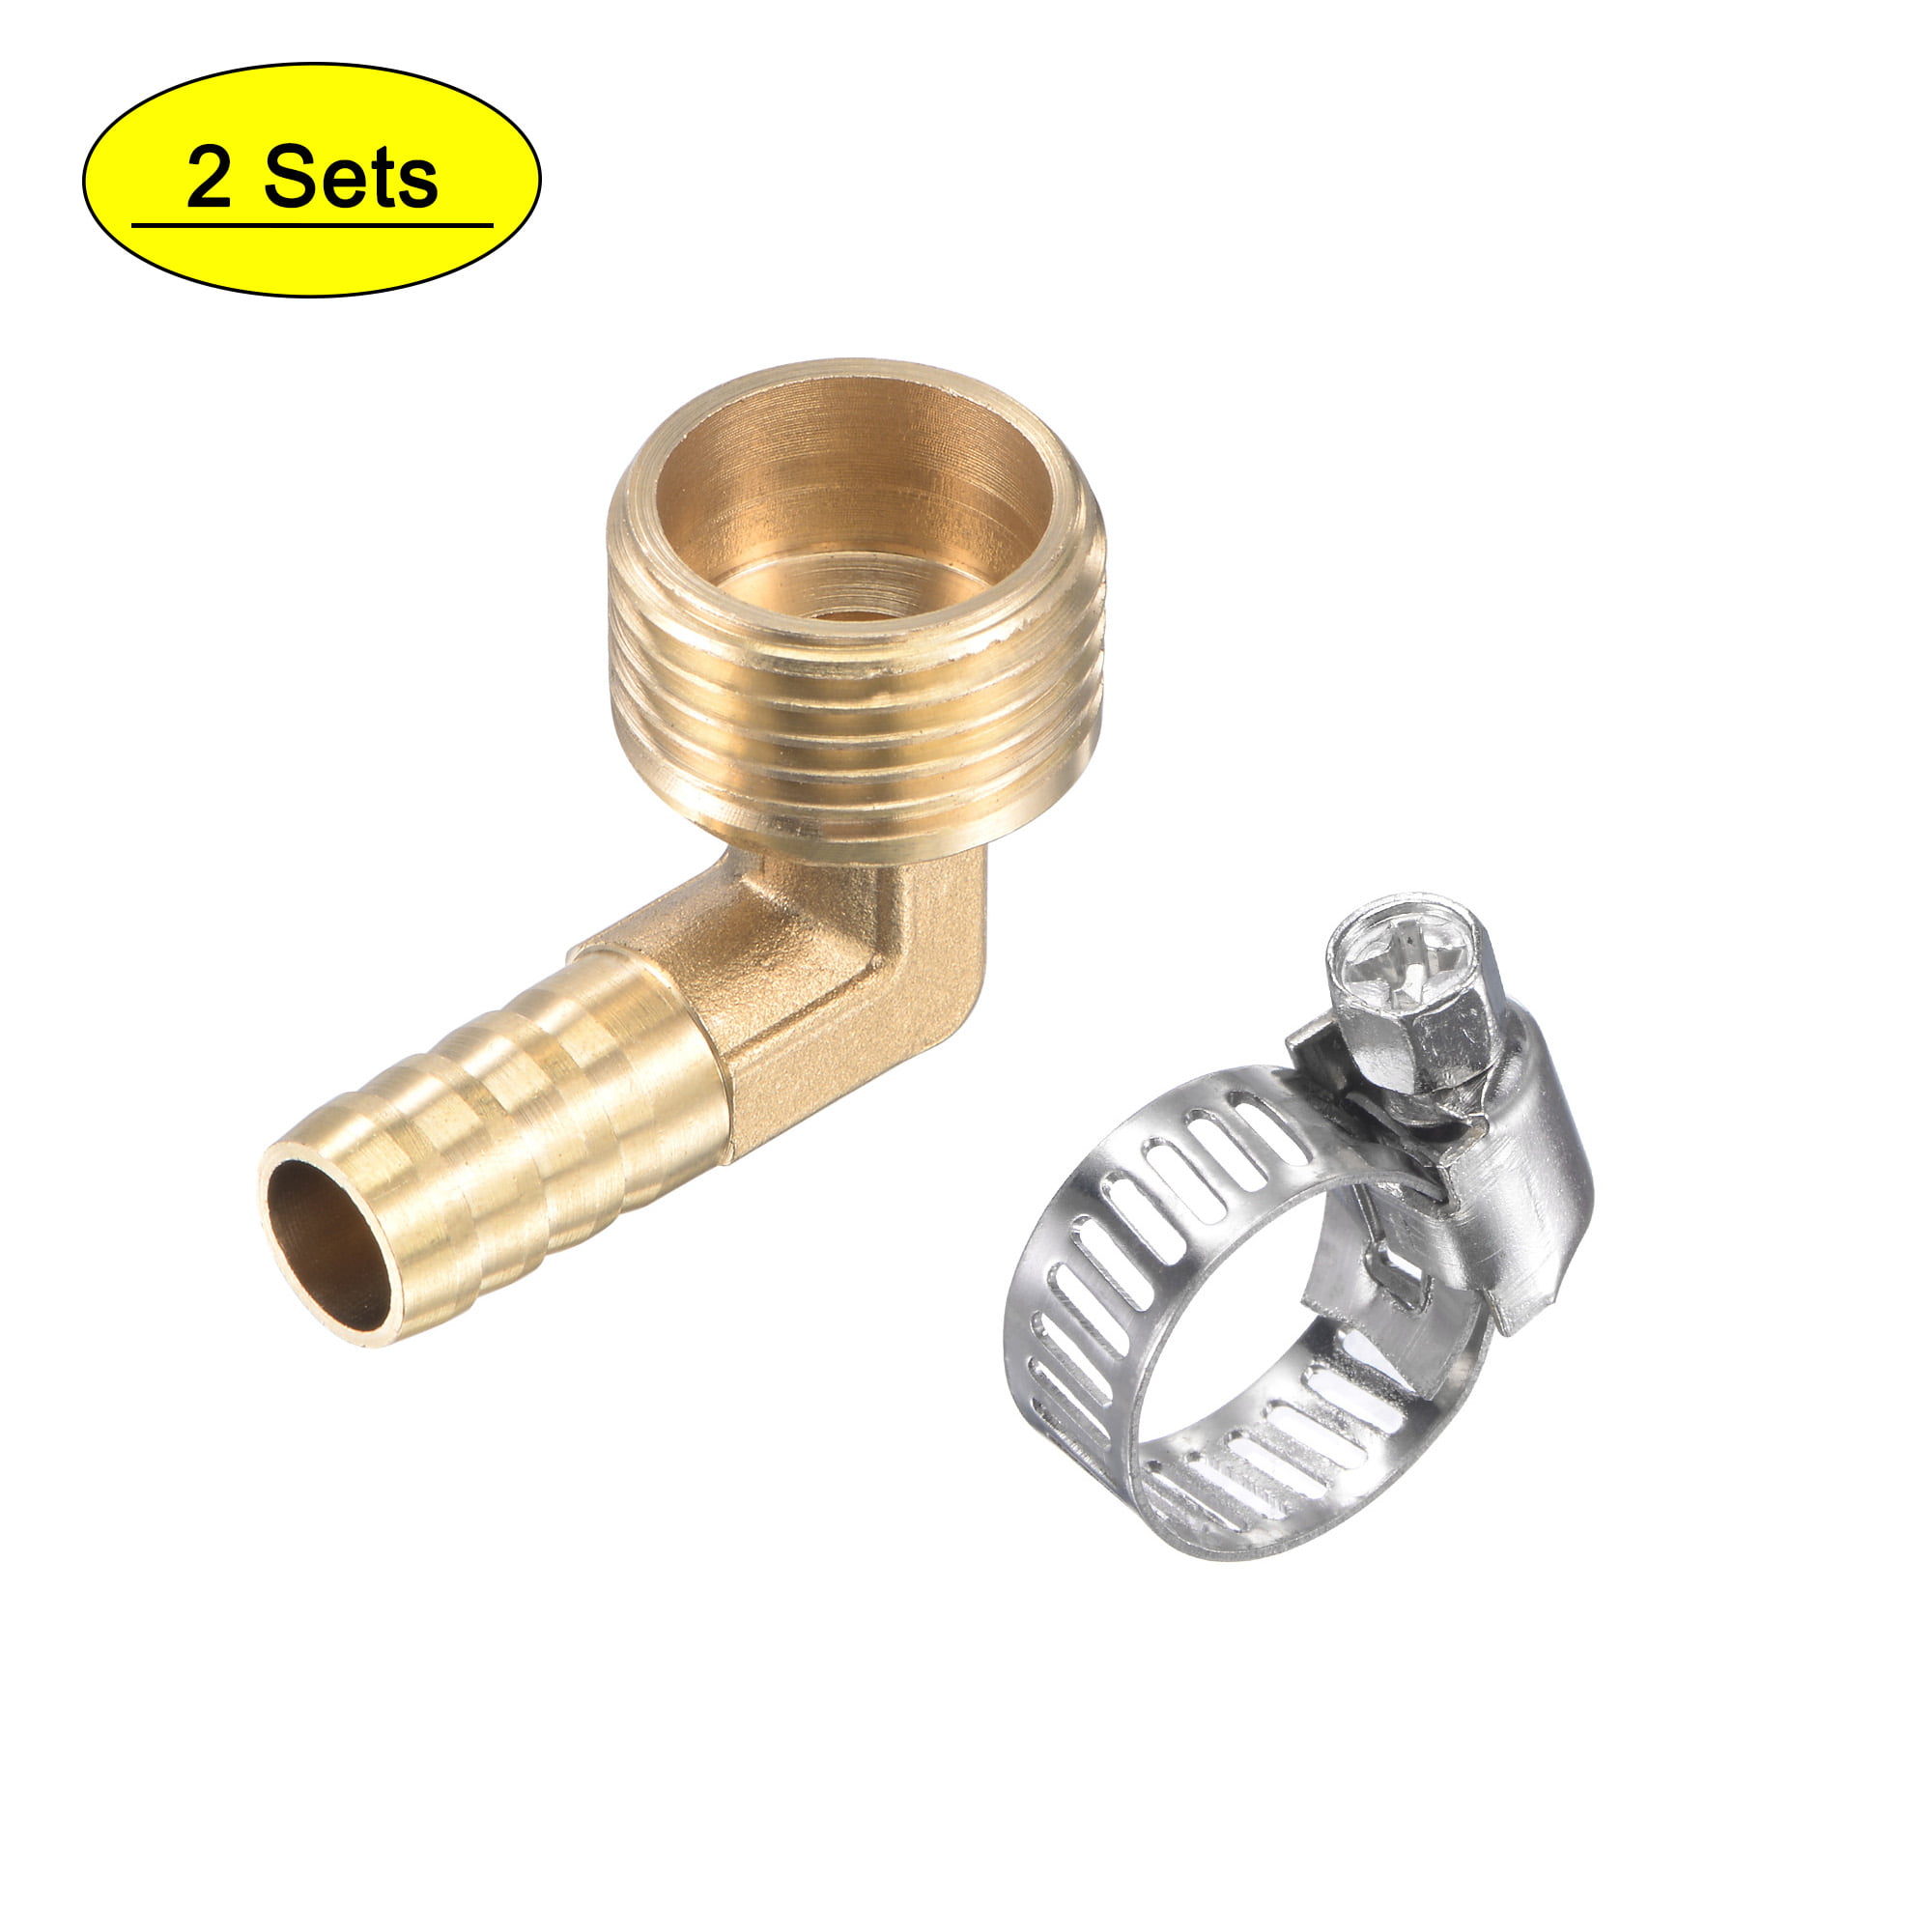 Details about   3/8" 10mm HOSE BARB TEE Brass Pipe 3 WAY T Fitting Thread Gas Fuel Water 